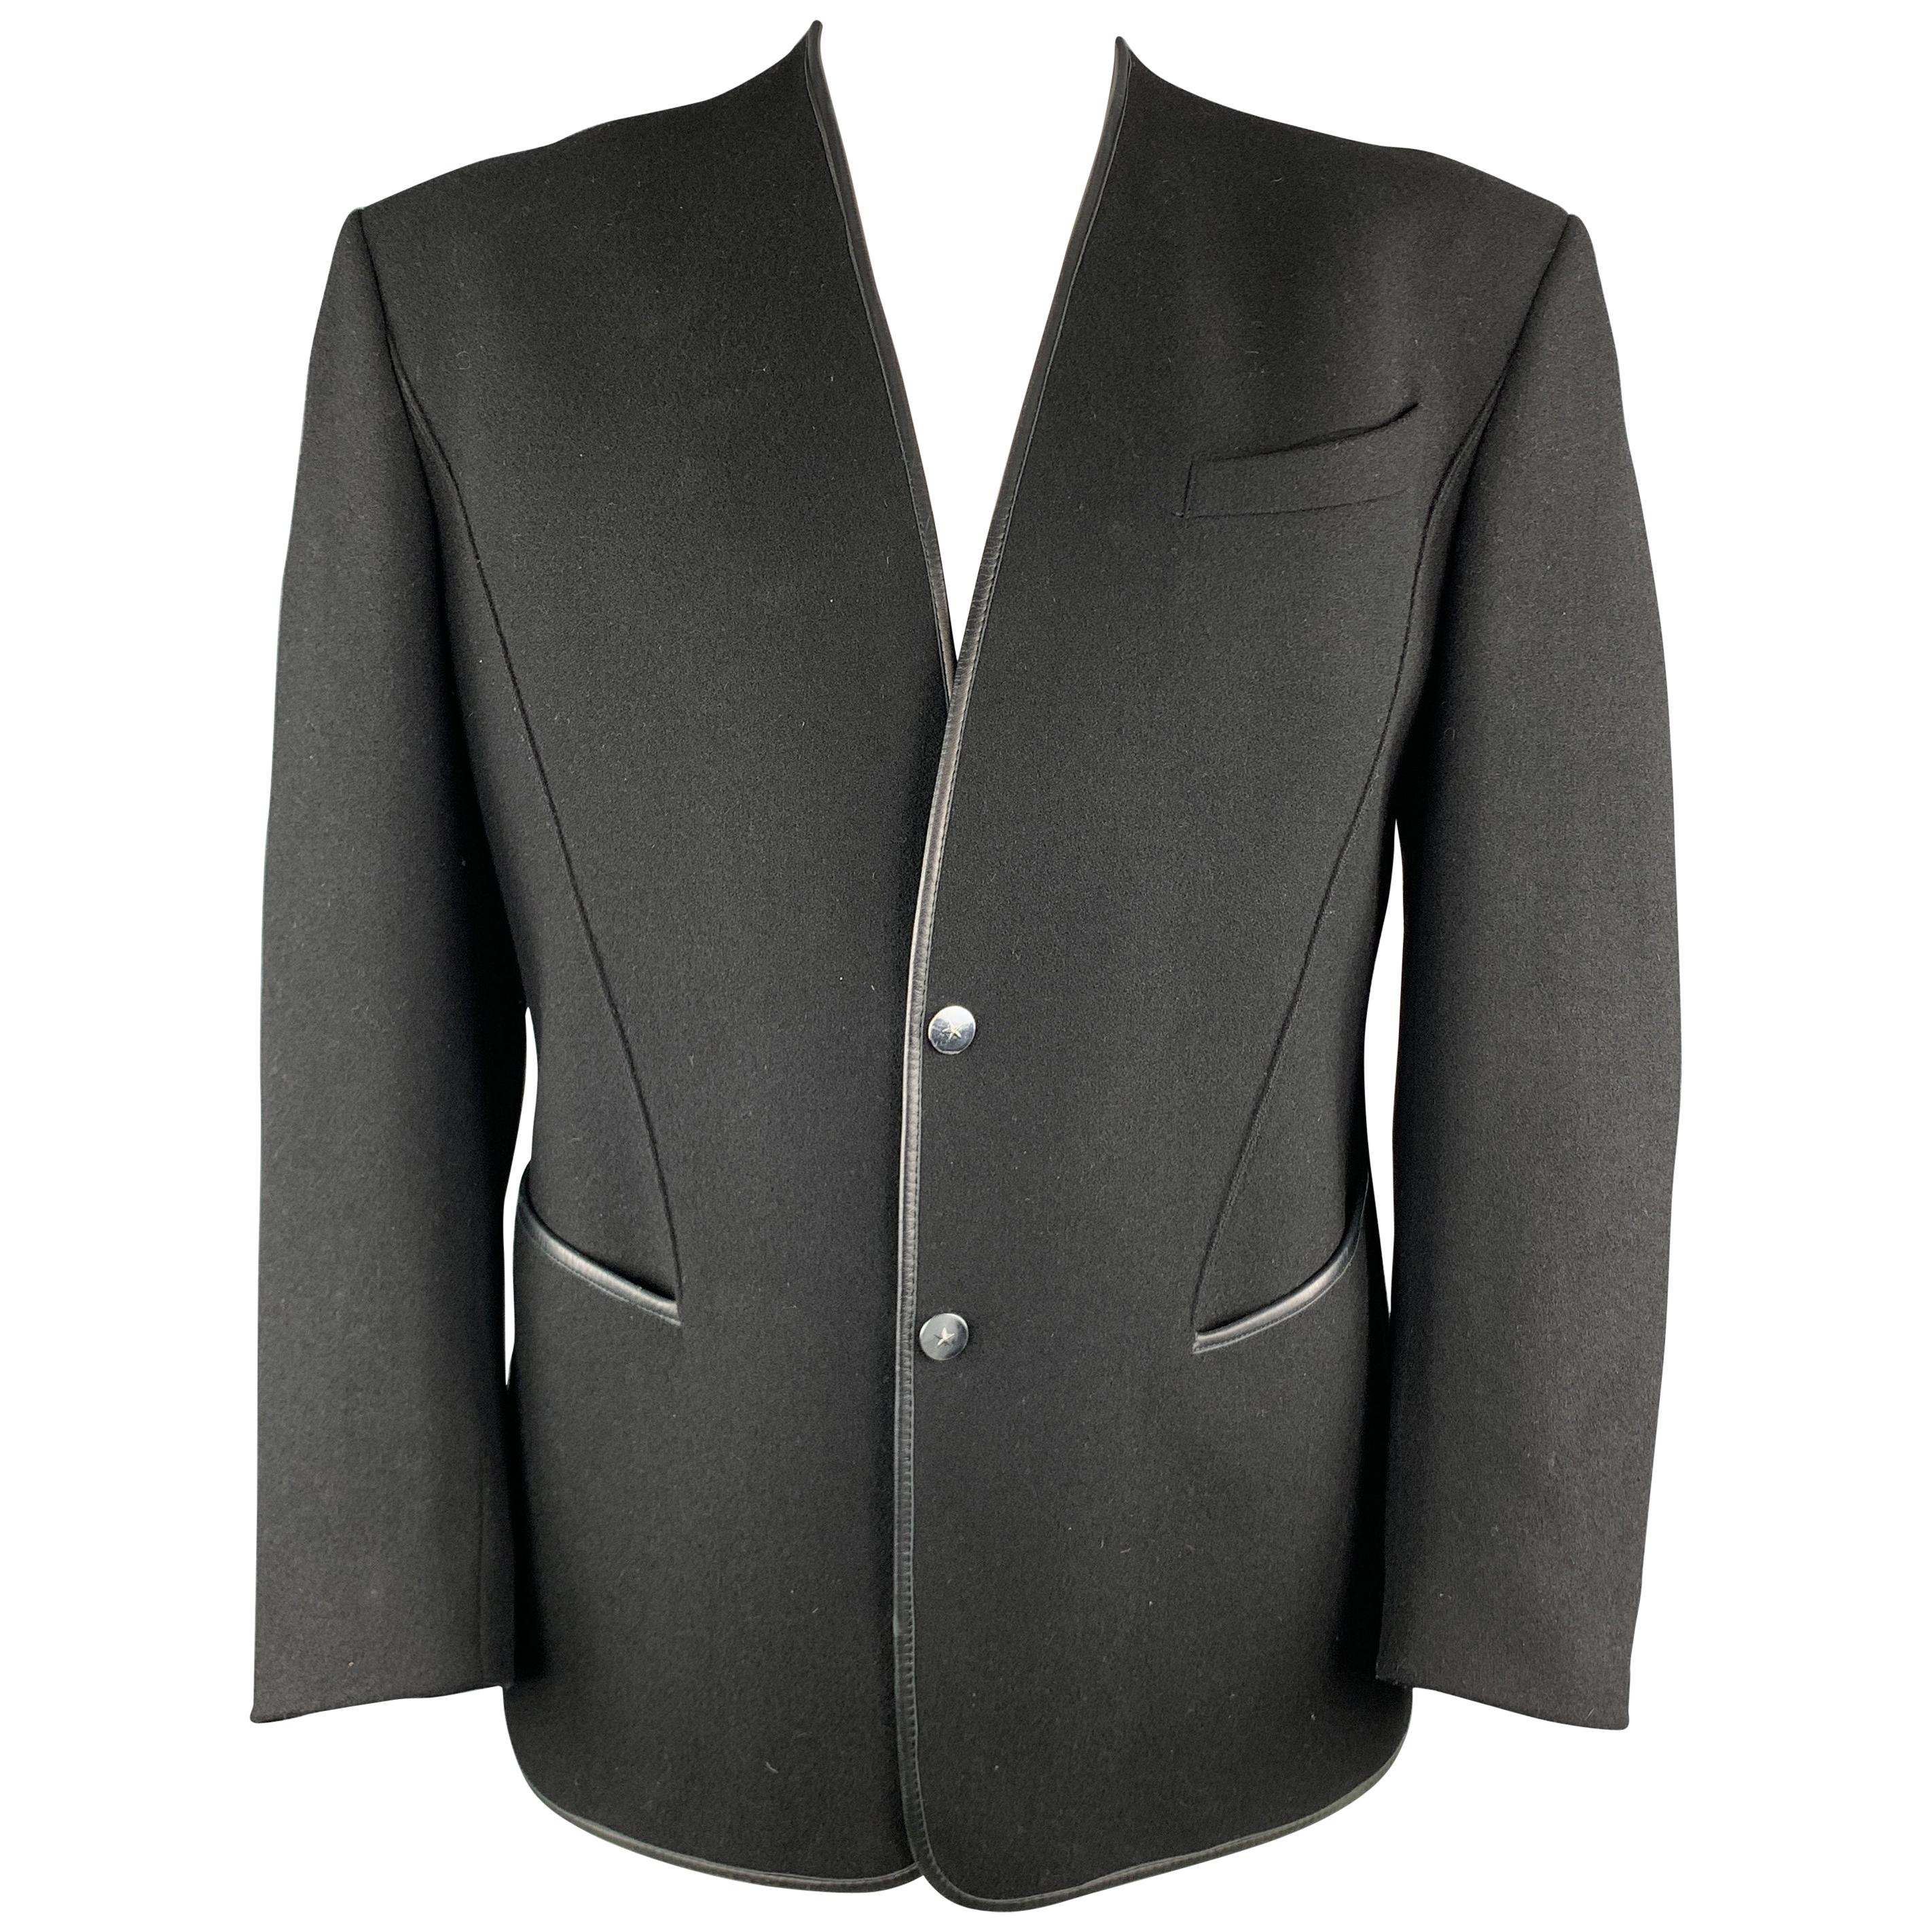 THIERRY MUGLER Chest Size 42 Black Solid Wool Blend Snaps Jacket